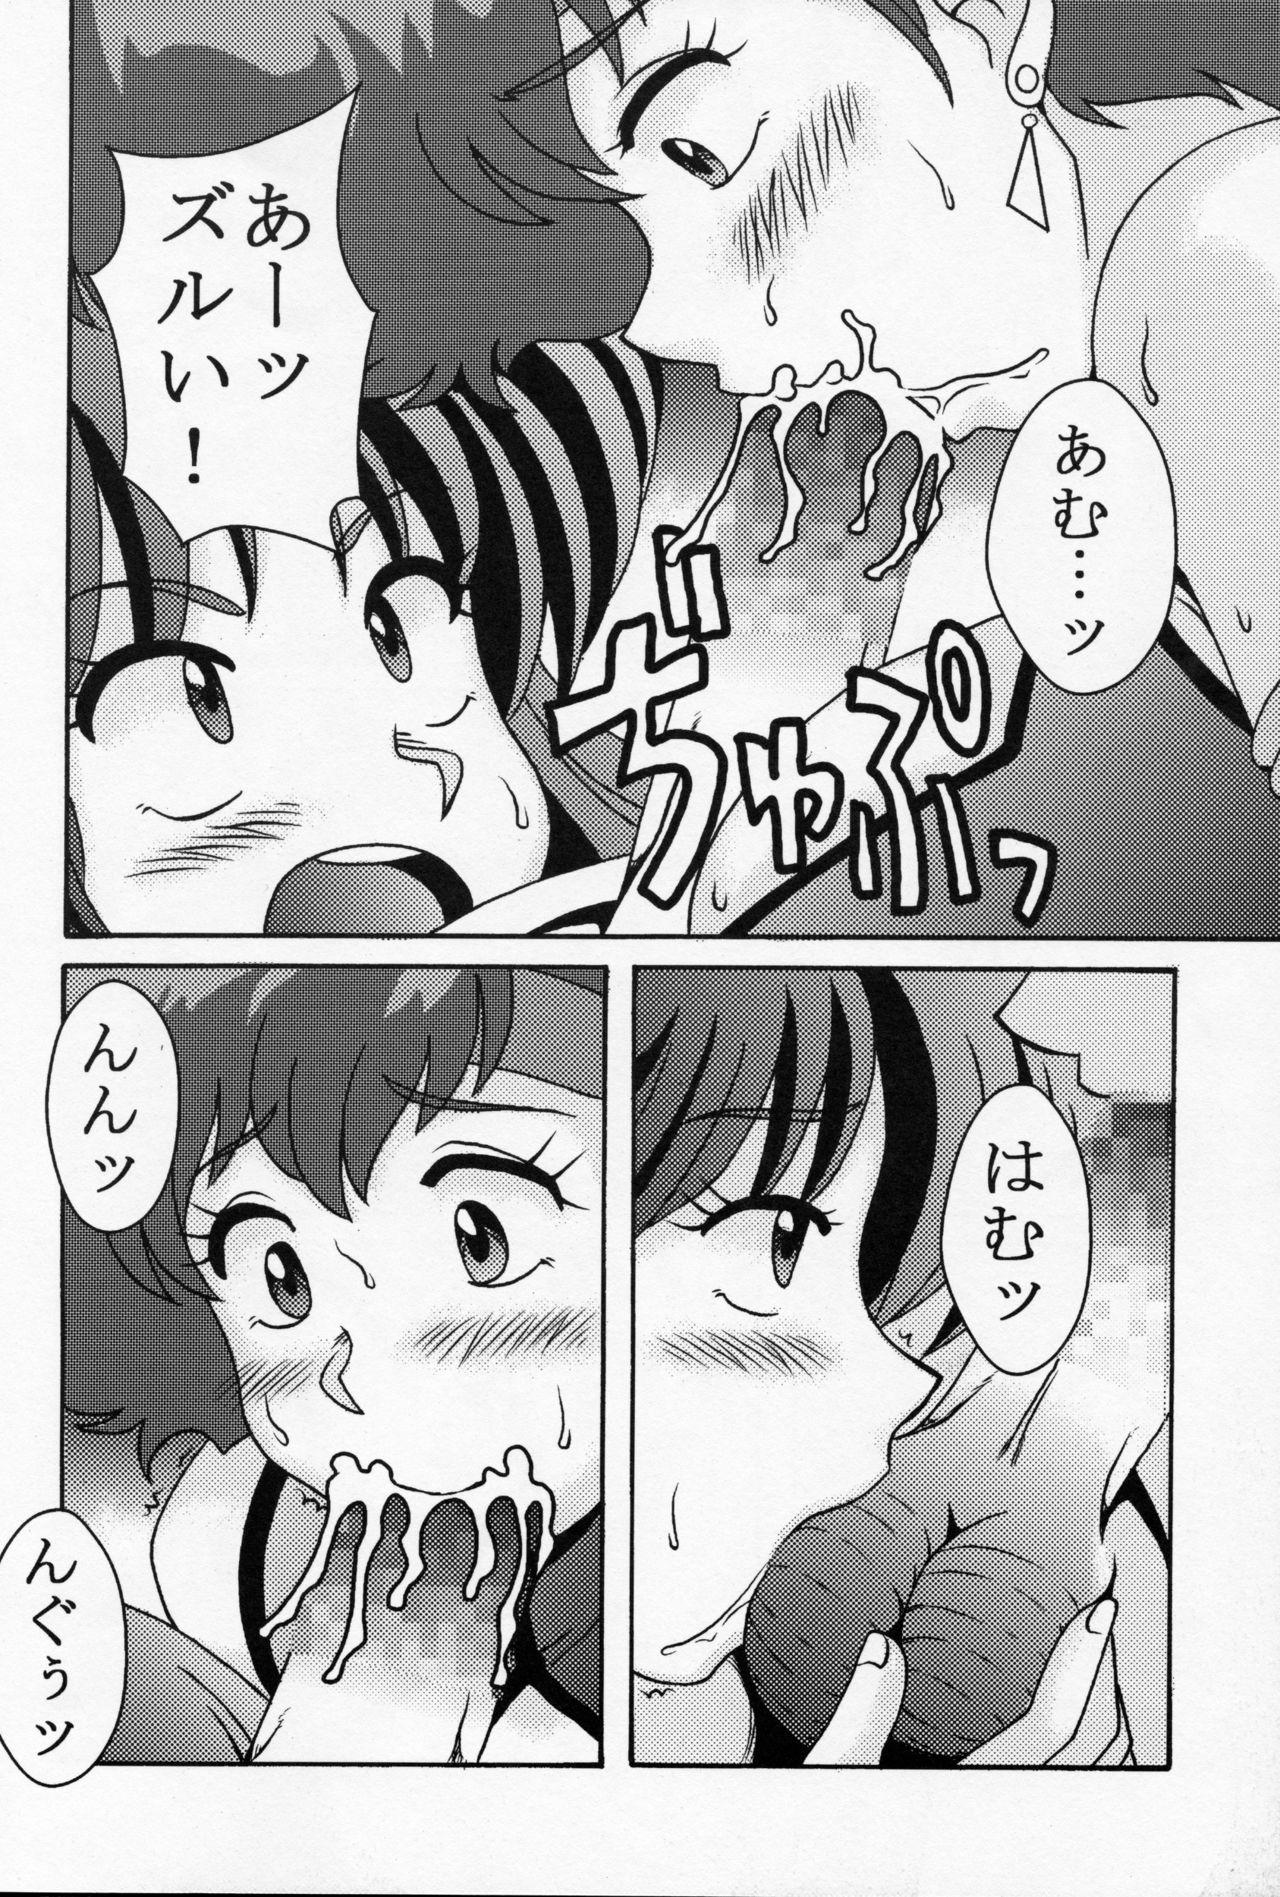 Shaking Kei to Yuri - Dirty pair Old Young - Page 9